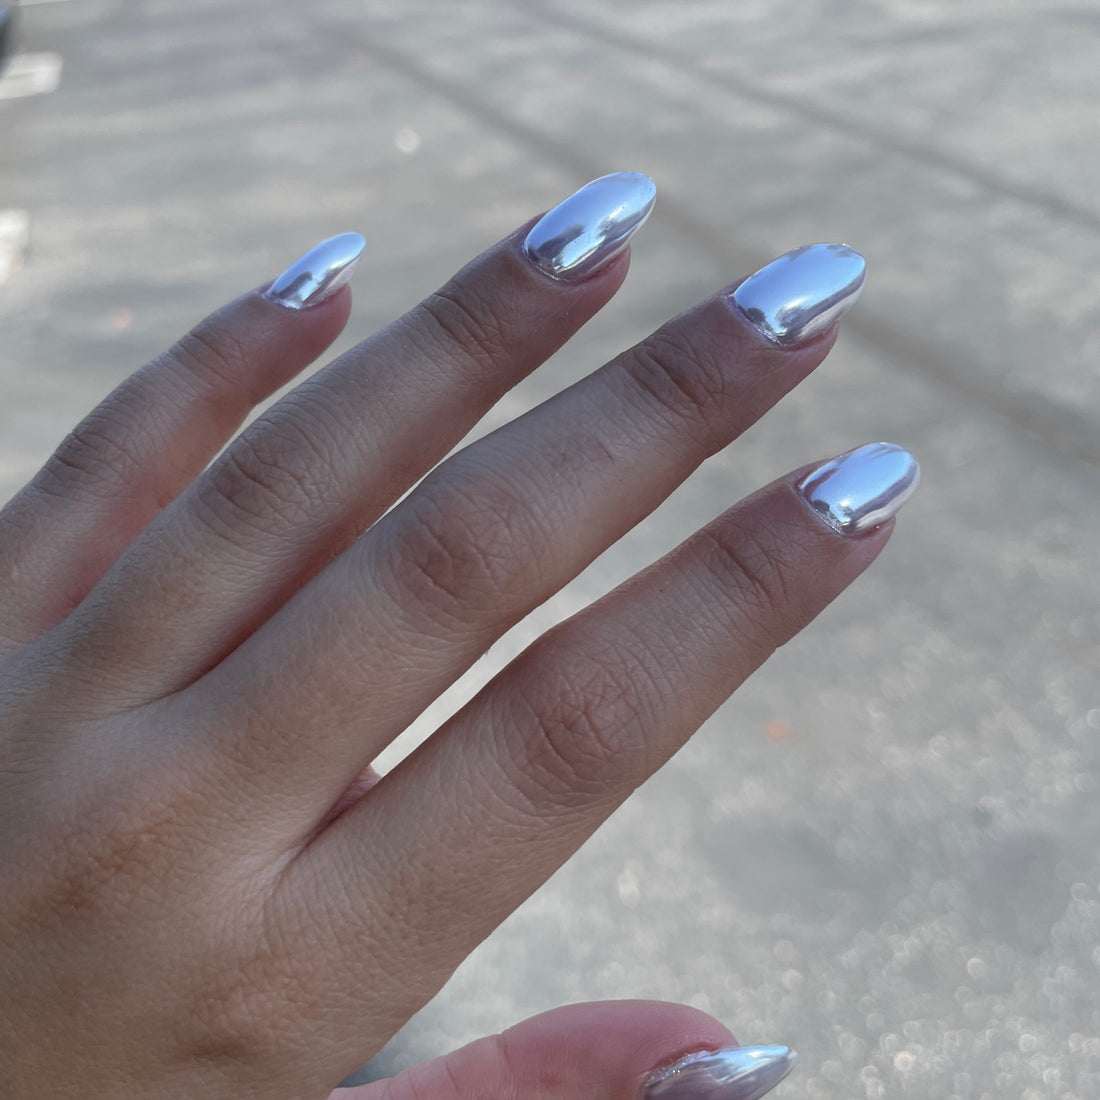 Recreating Kylie Jenner's chrome french tip nails *EASY GEL-X NAILS* -  YouTube